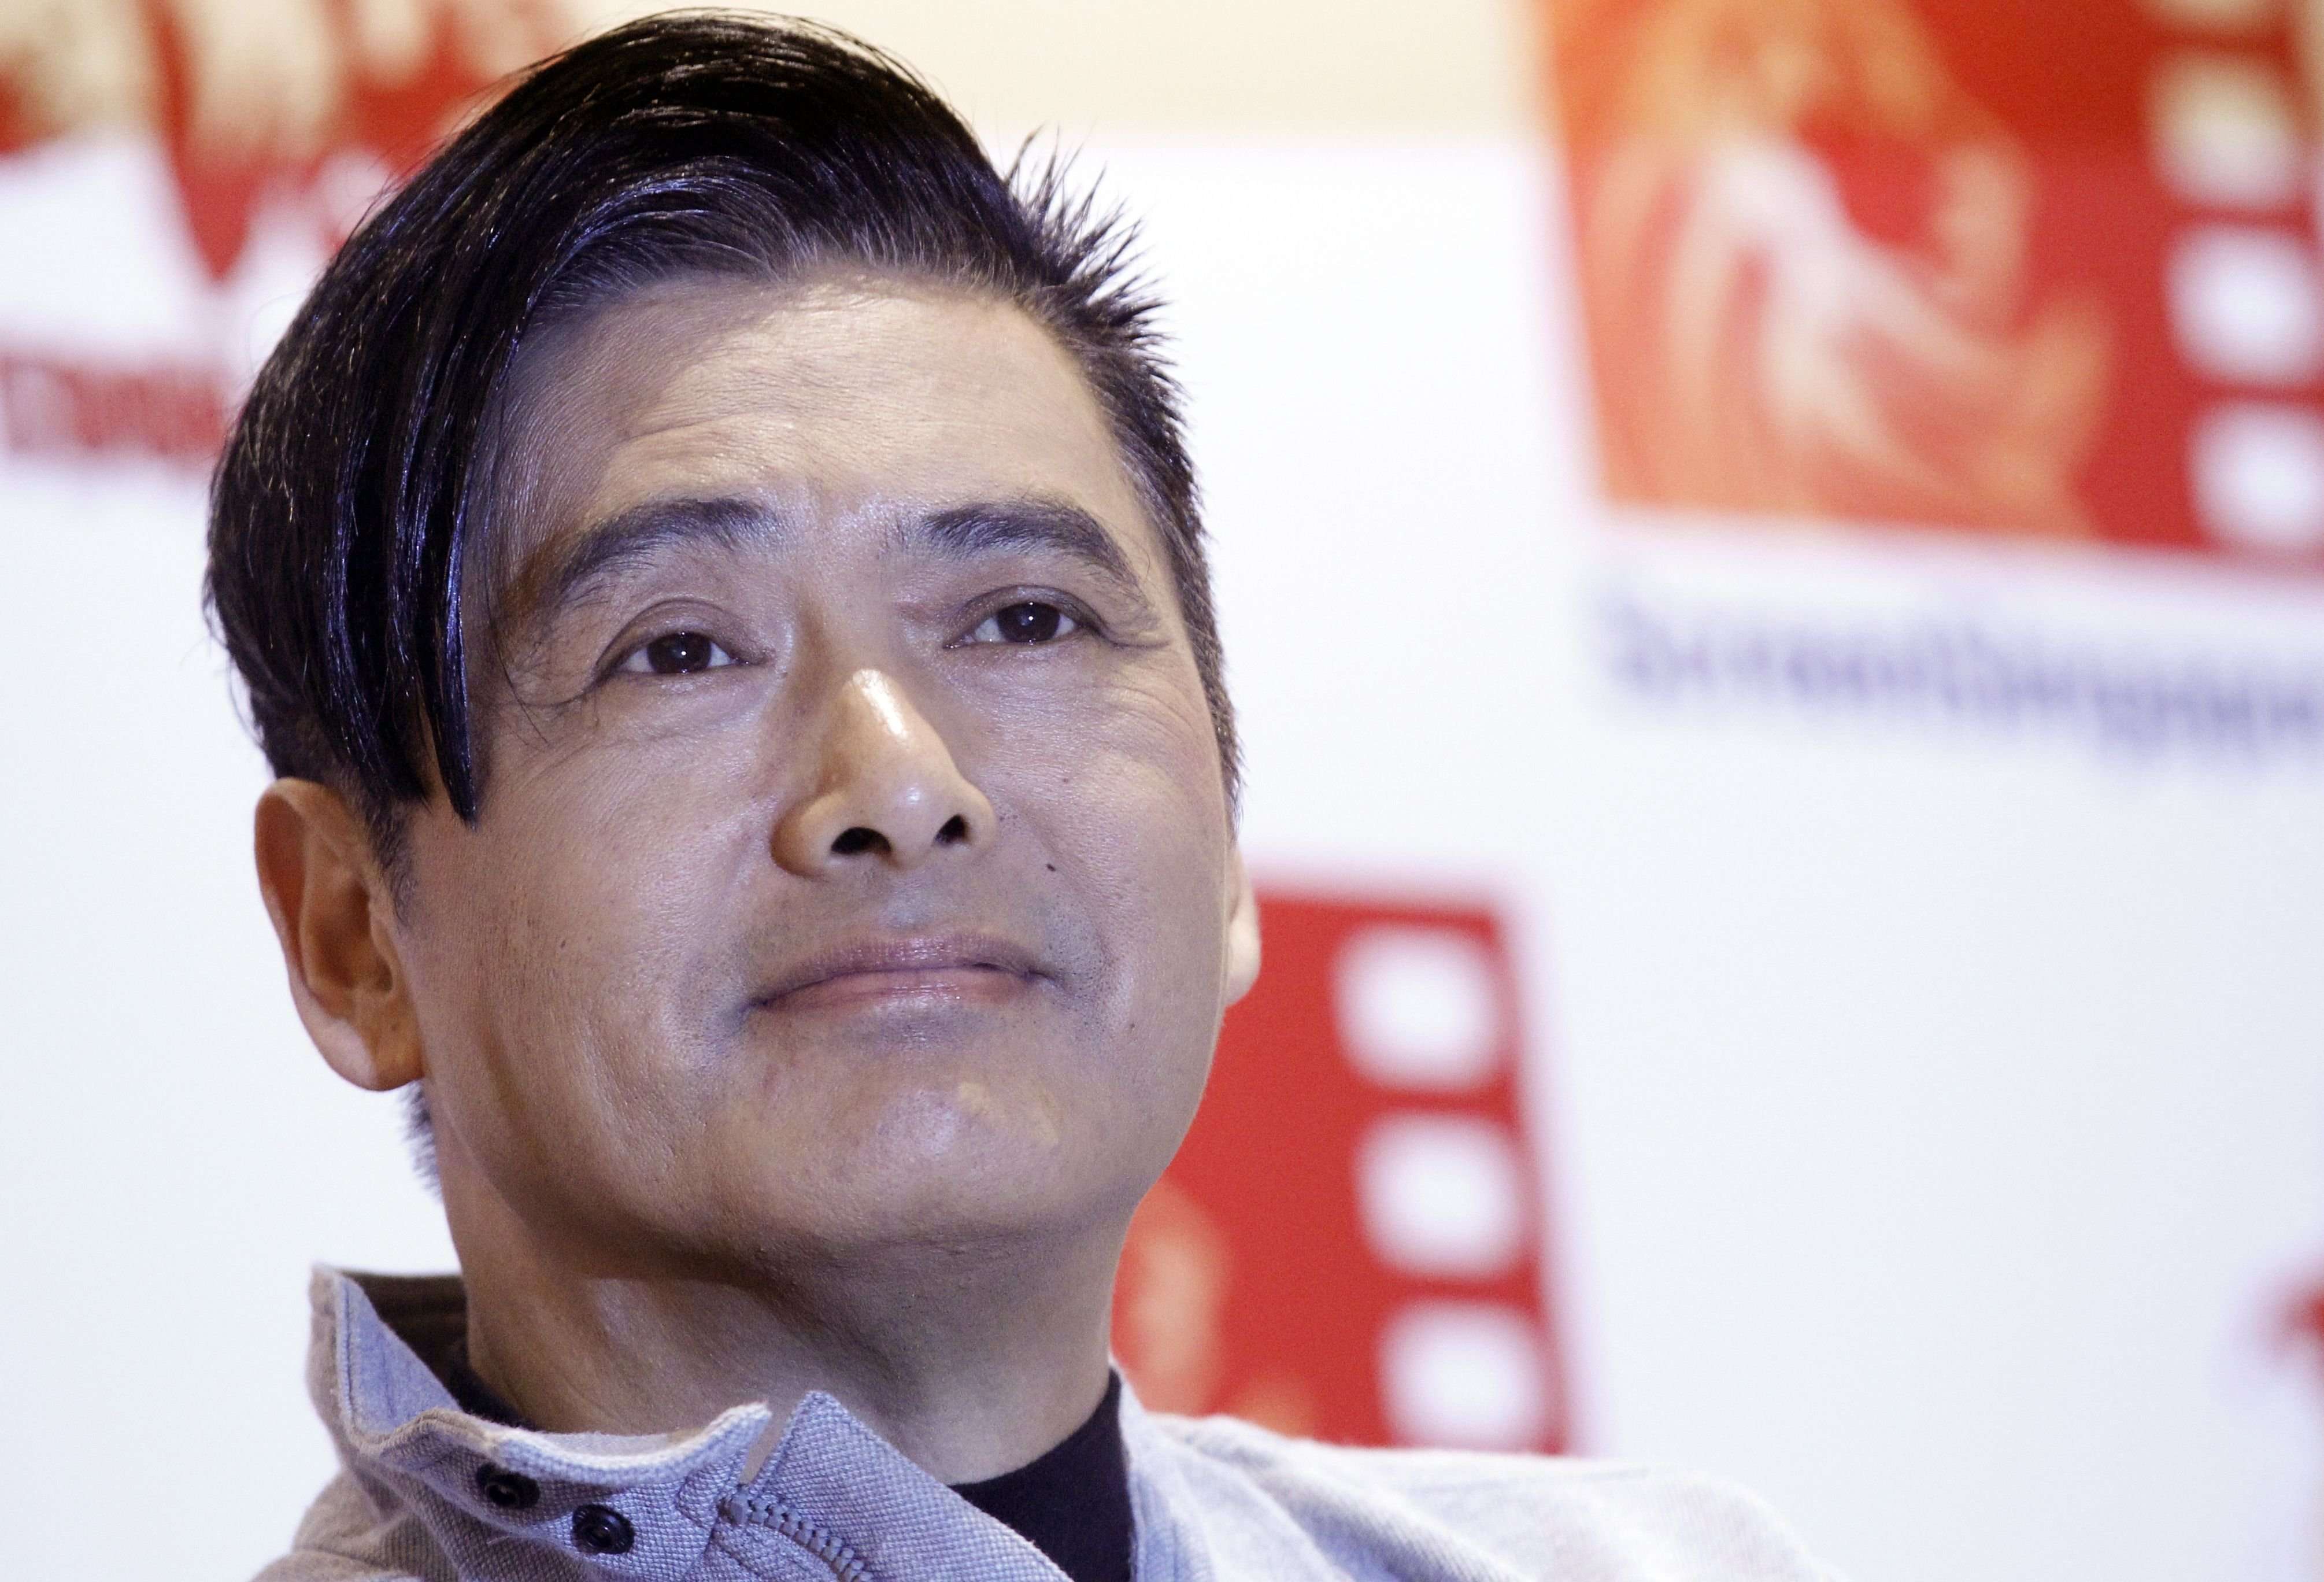 image for ‘Crouching Tiger, Hidden Dragon’ Star Chow Yun-fat Plans to Give His Entire Fortune to Charity